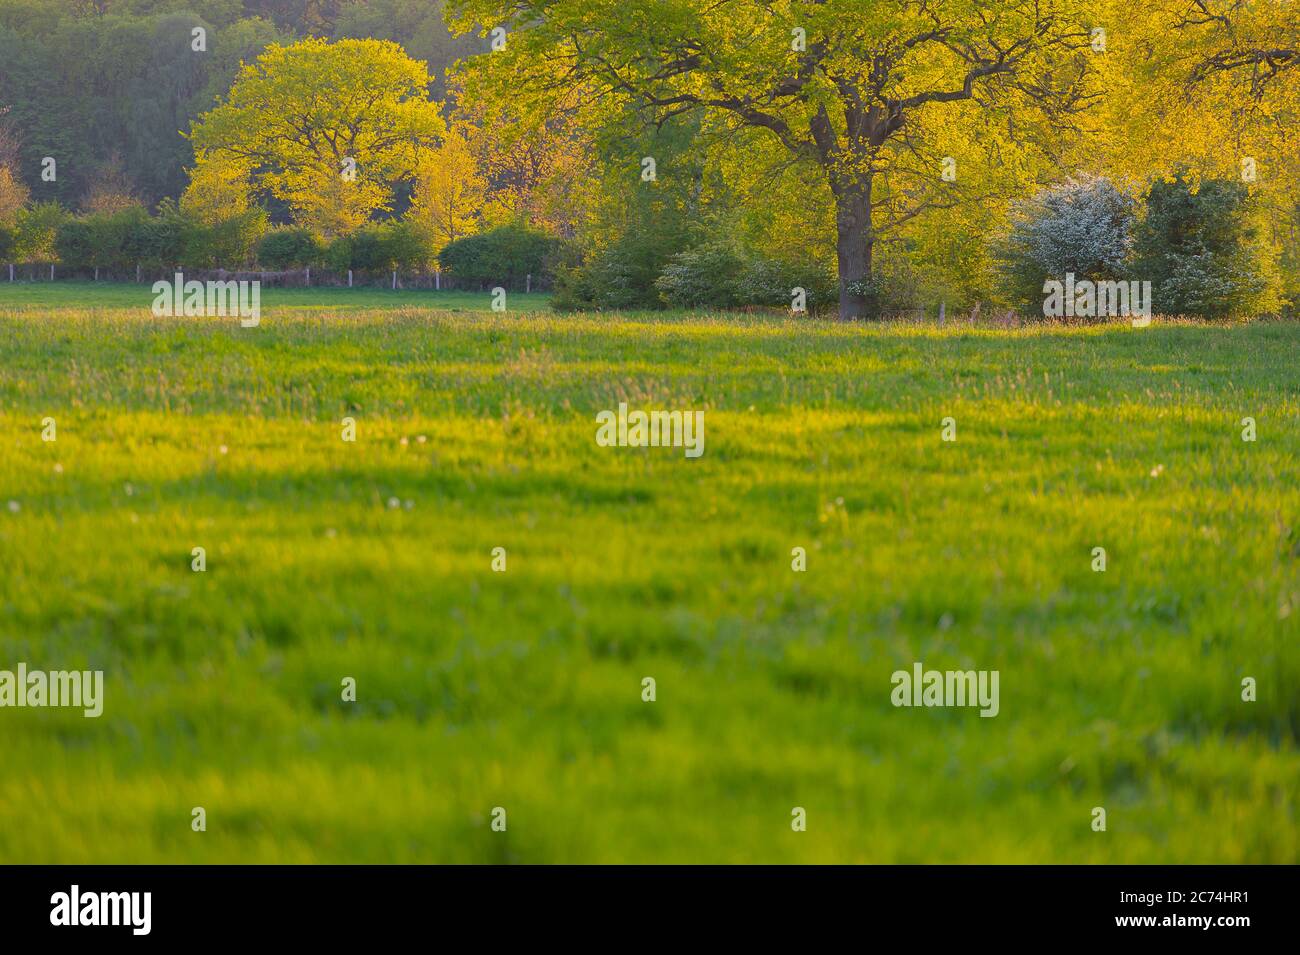 Hummelsbuettel estate with old oaks, hawthorn and others in spring, Germany, Hamburg Stock Photo